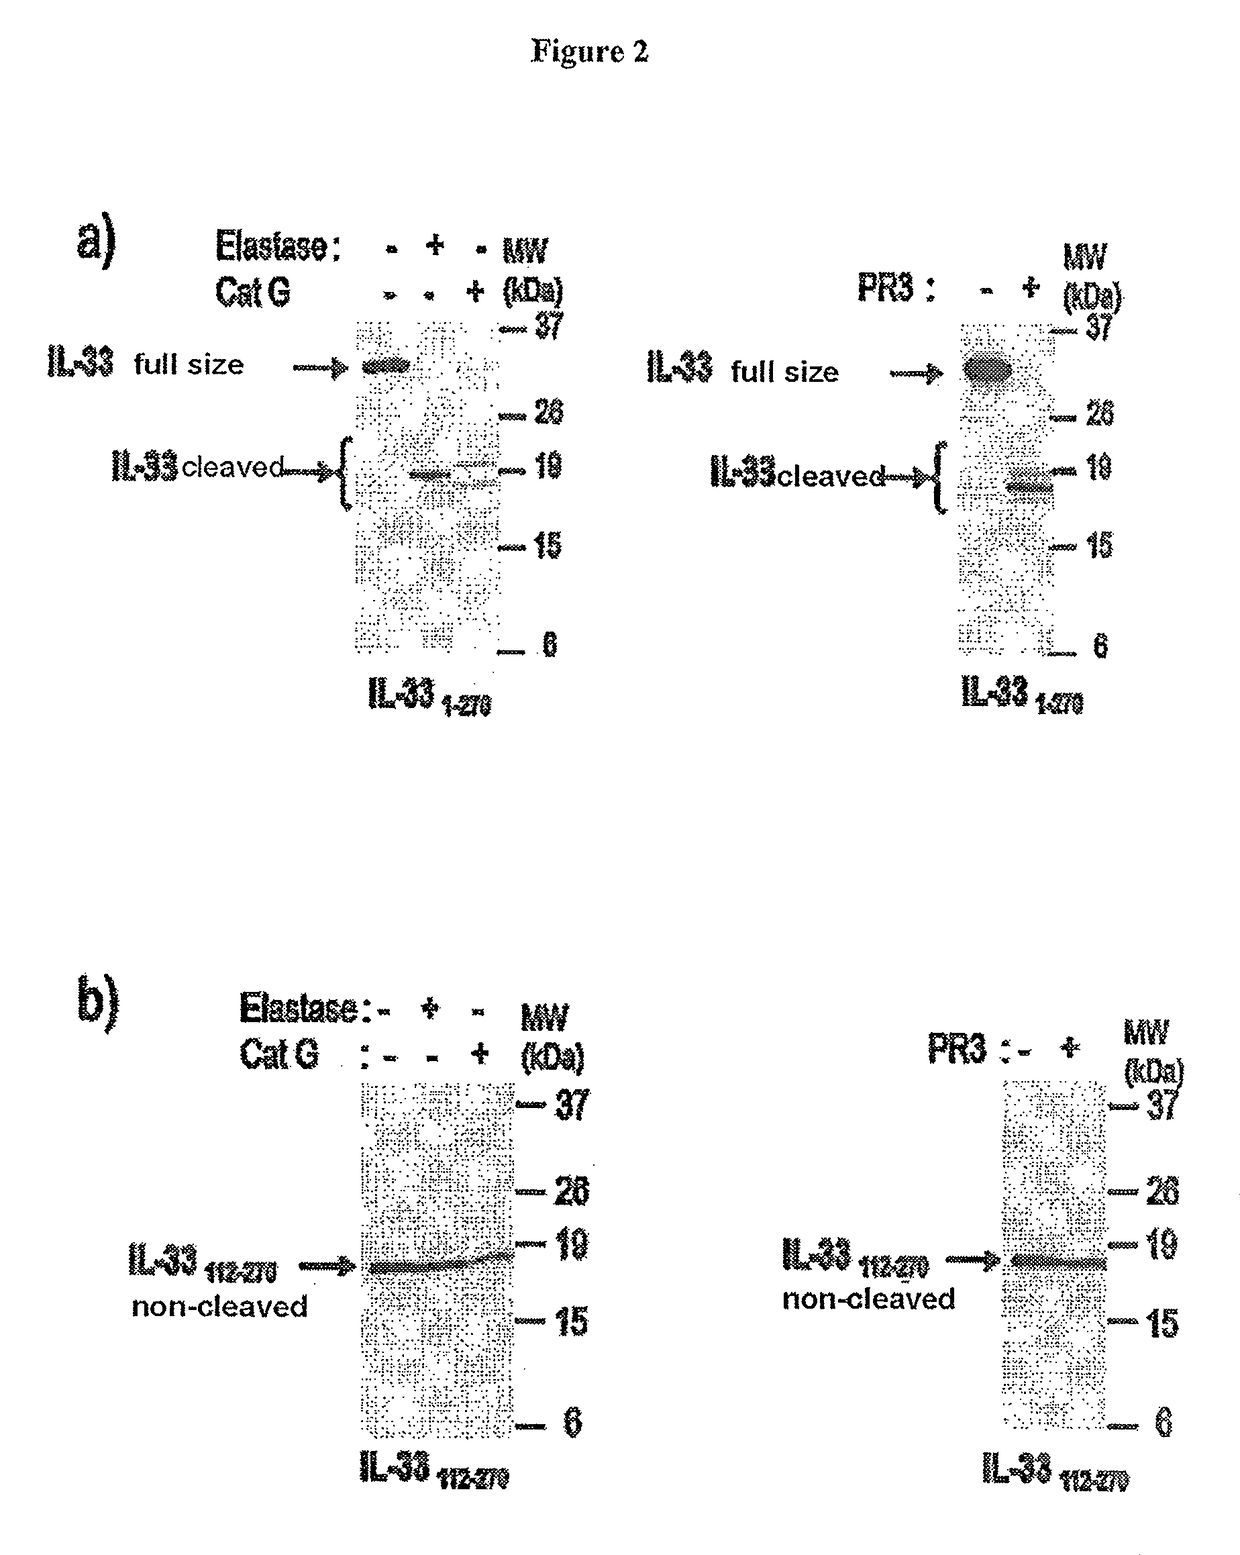 Method for increasing granulocyte number in a patient by administering superactive IL-33 fragments